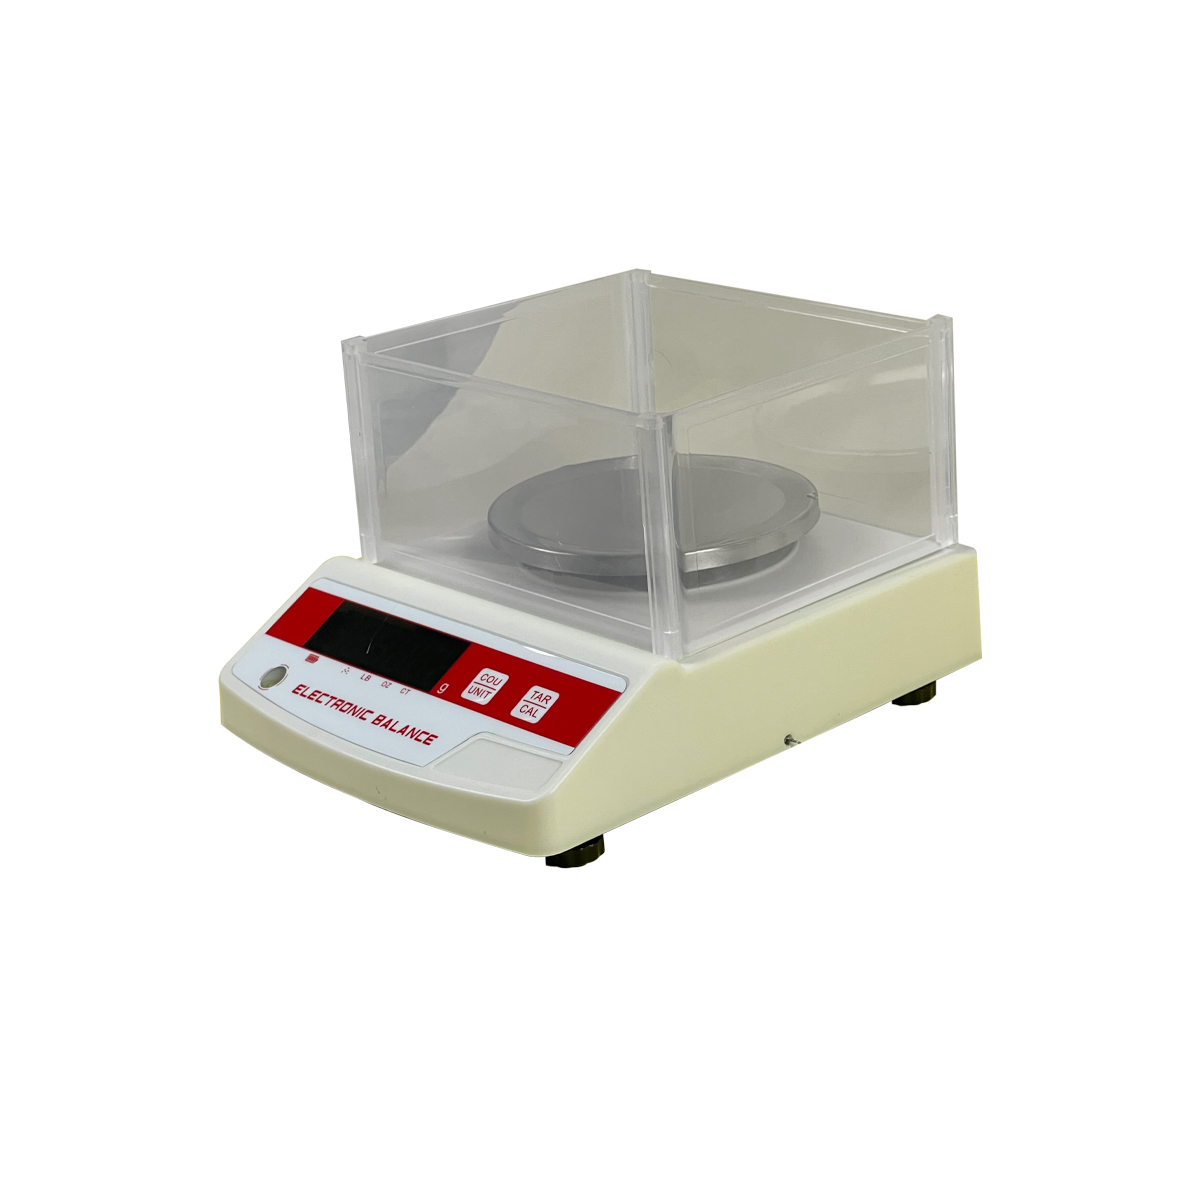 Weighing scale and load capacity, 3 kg, red